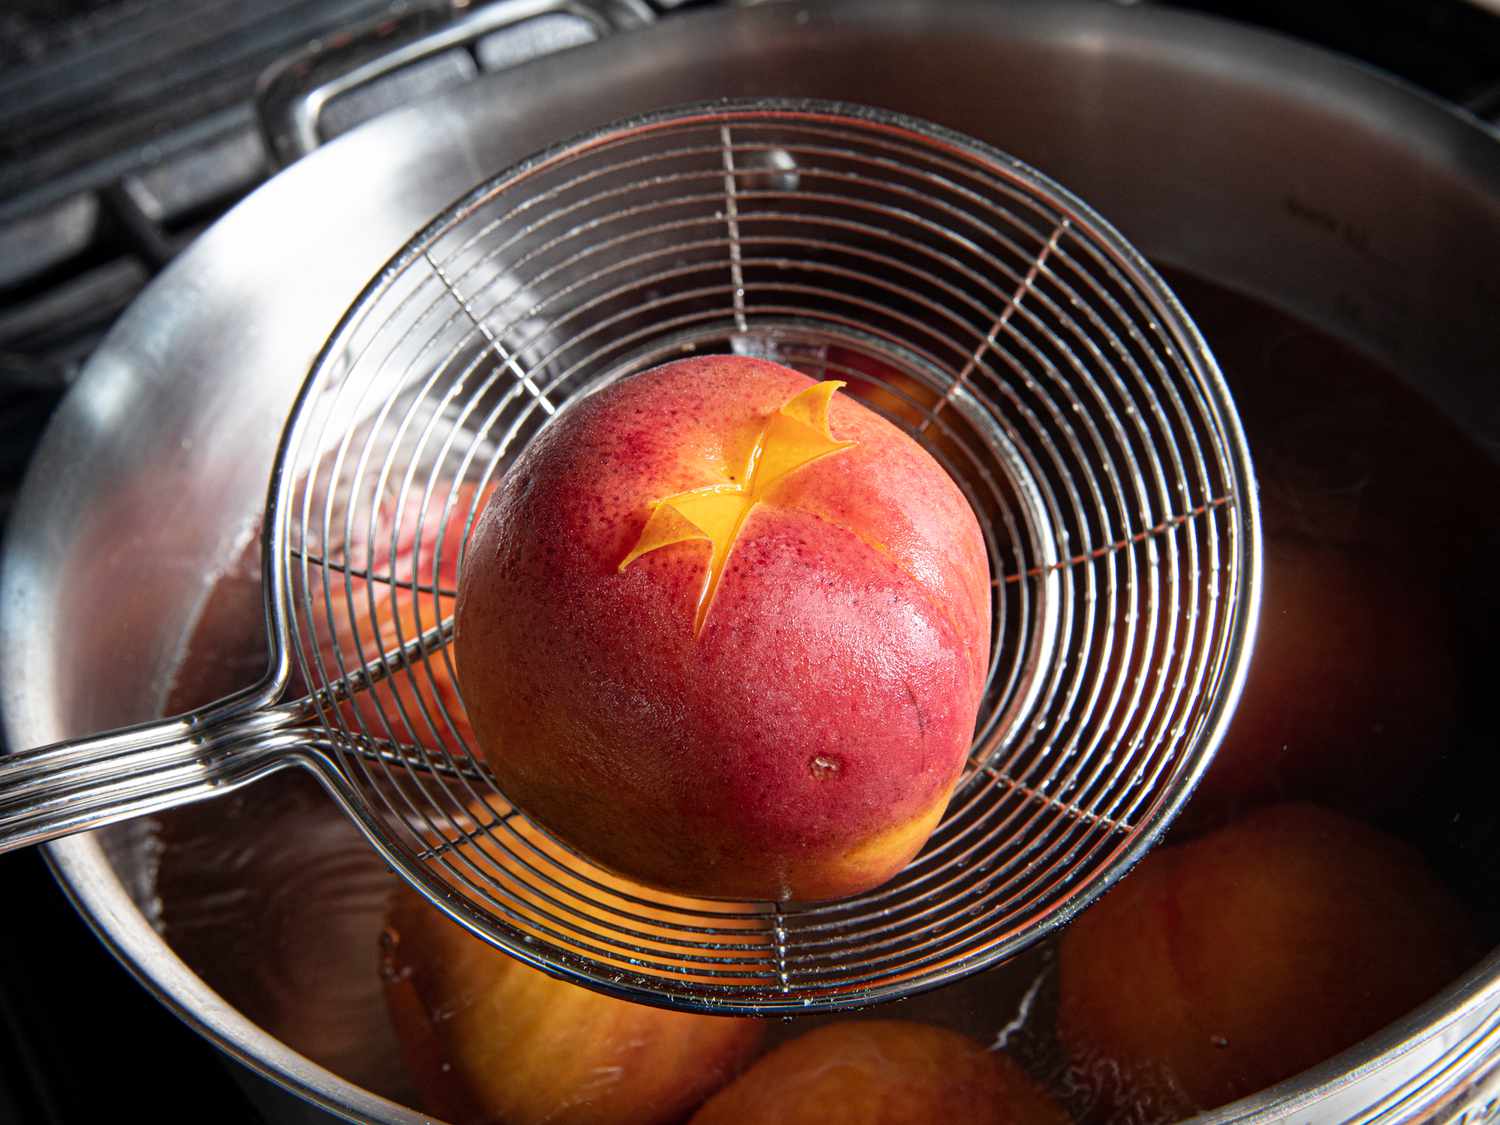 Peaches after being boiled